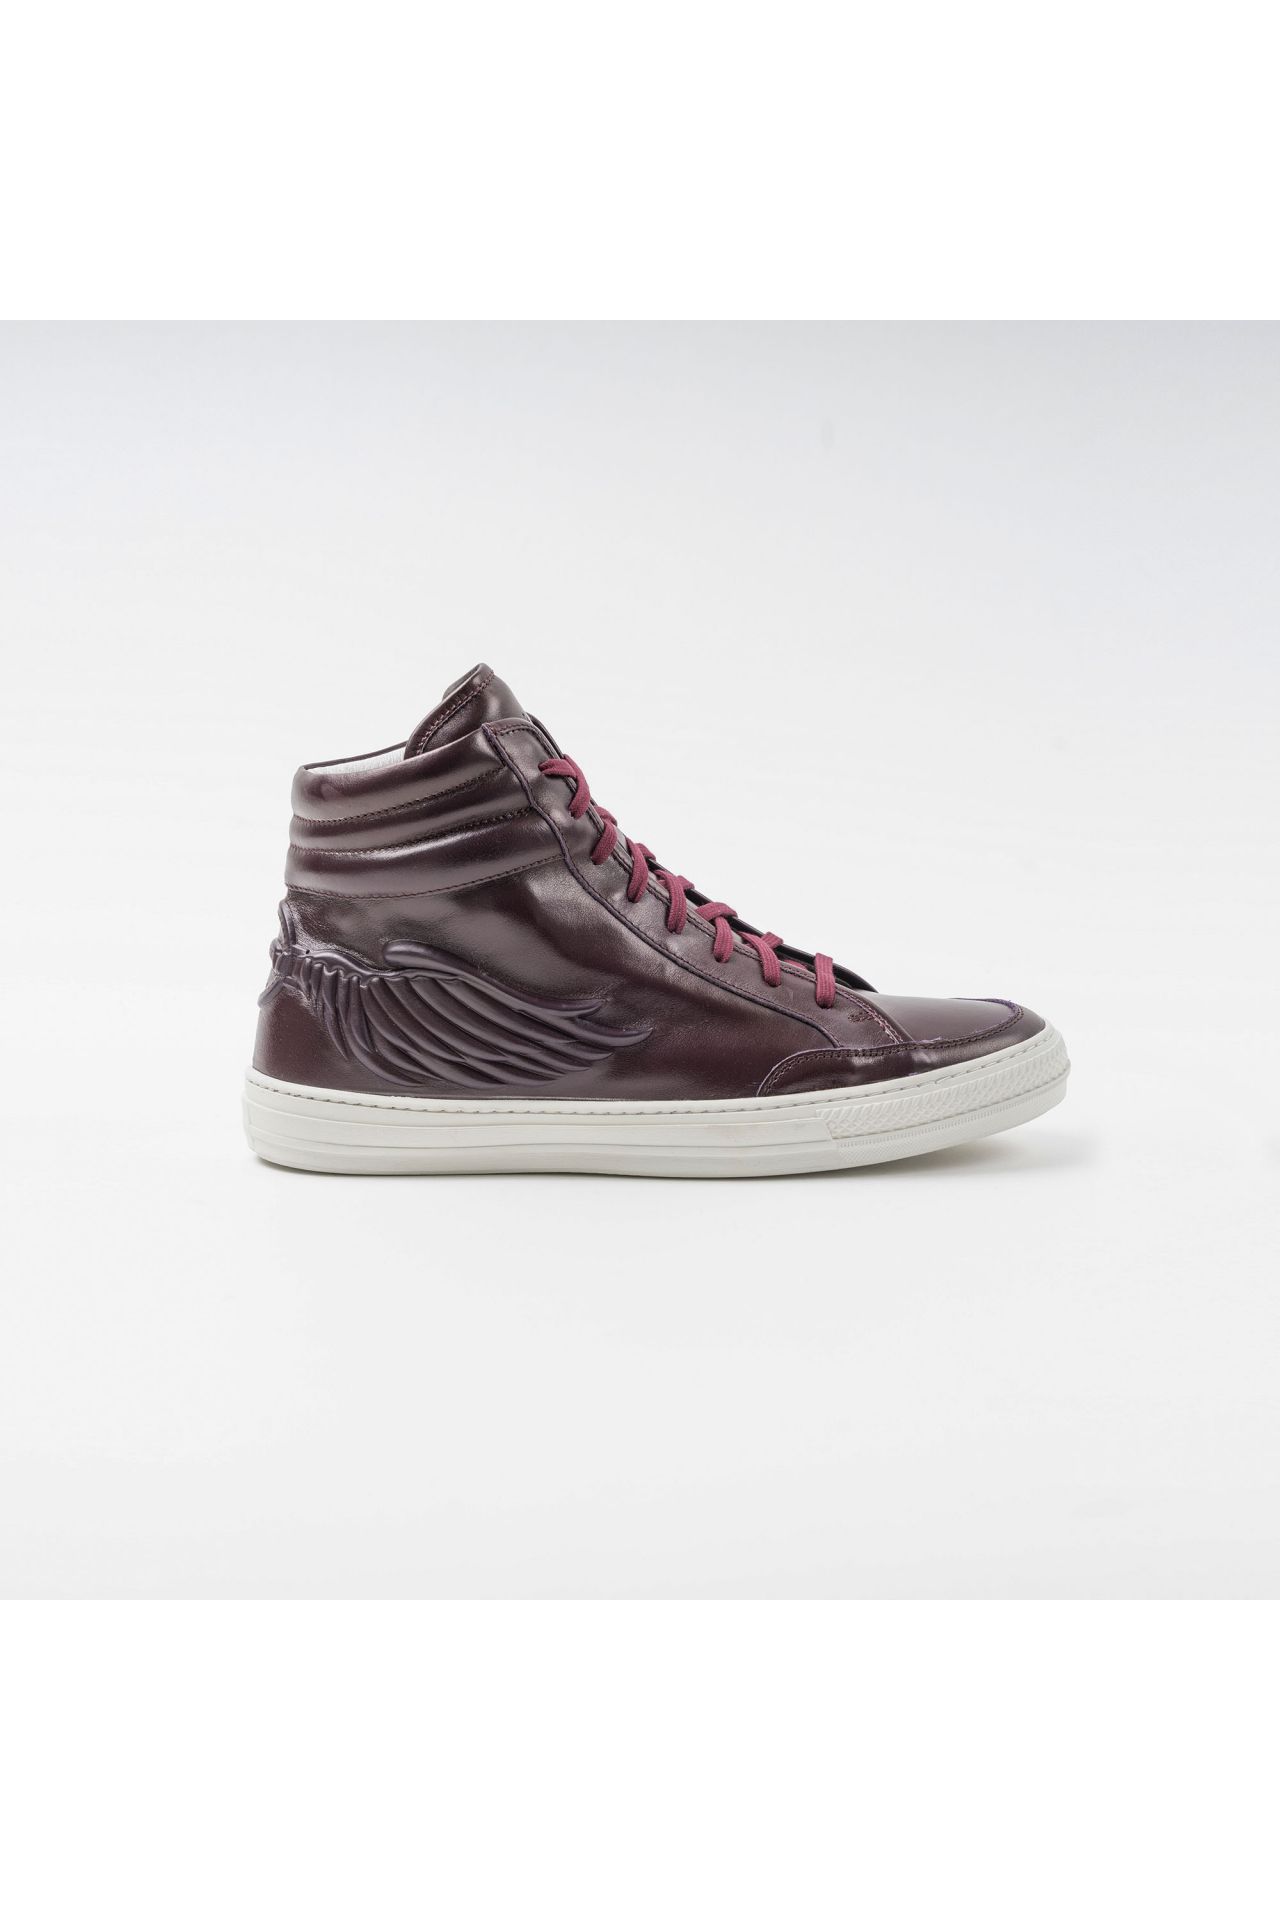 MENS HIGH TOP ZIPPER SNEAKERS IN LAMINATED BURGUNDY LEATHER